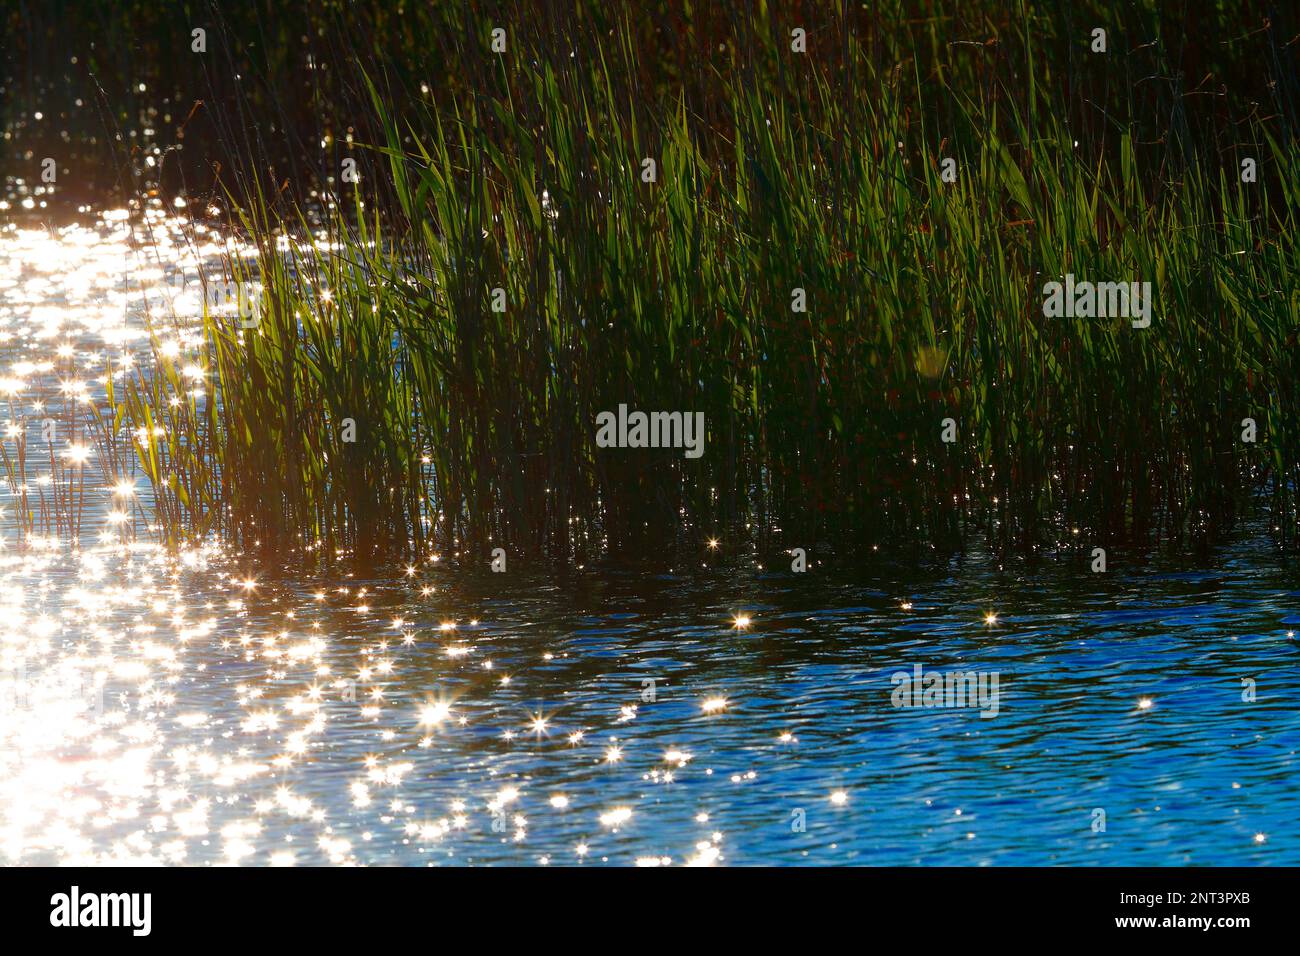 Light reflecting on water creating a star shaped bokeh effect in front of reeds in wetlands at St.Aidans RSPB nature reserve in the early evening sun Stock Photo